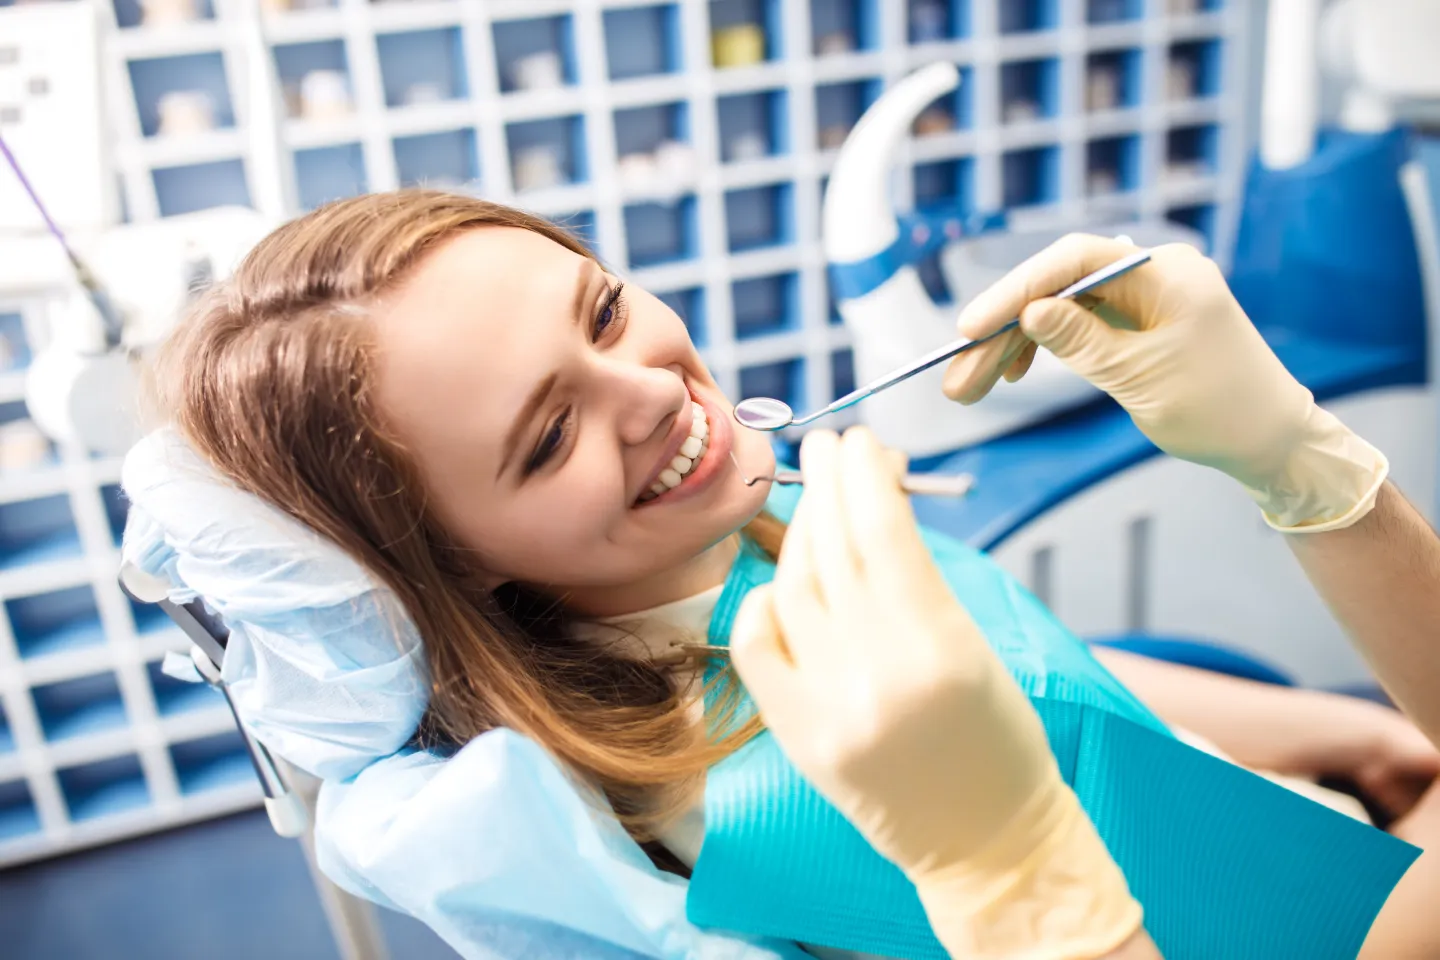 Receive professional dental check-up from Dr. Gauri Savant, the best dentist in New York